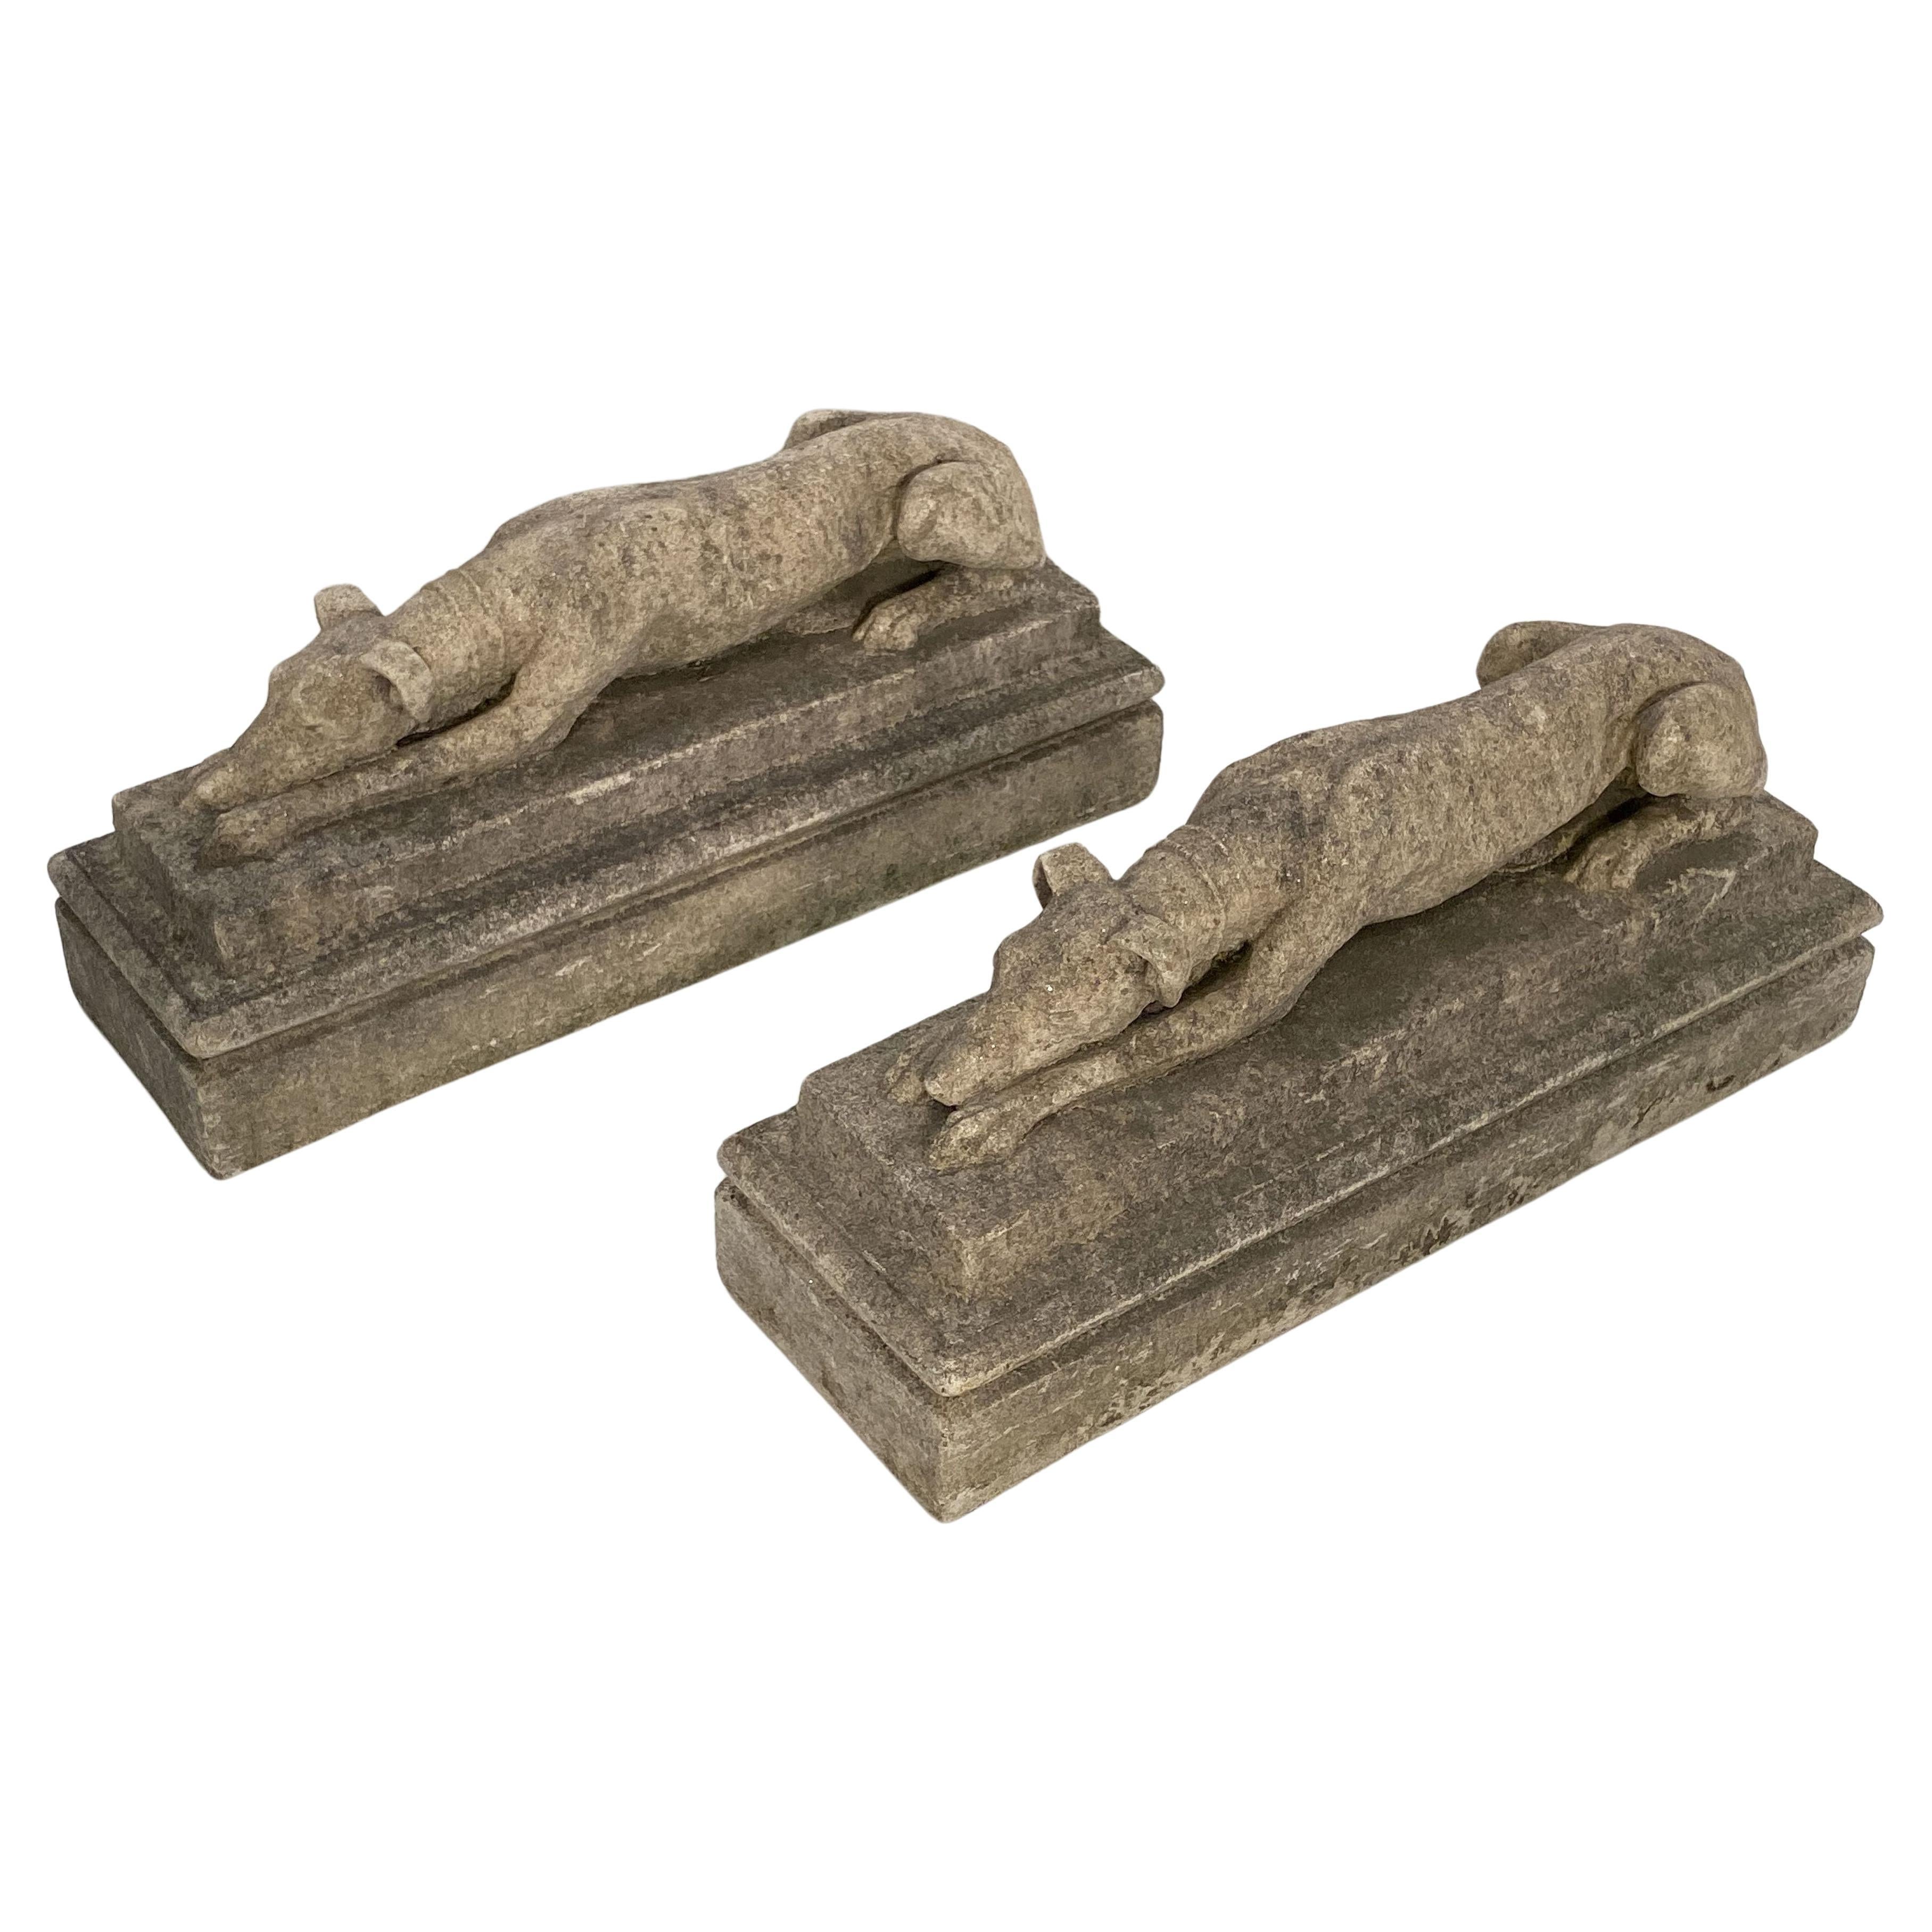 English Garden Stone Greyhounds or Whippets - Individually Priced For Sale